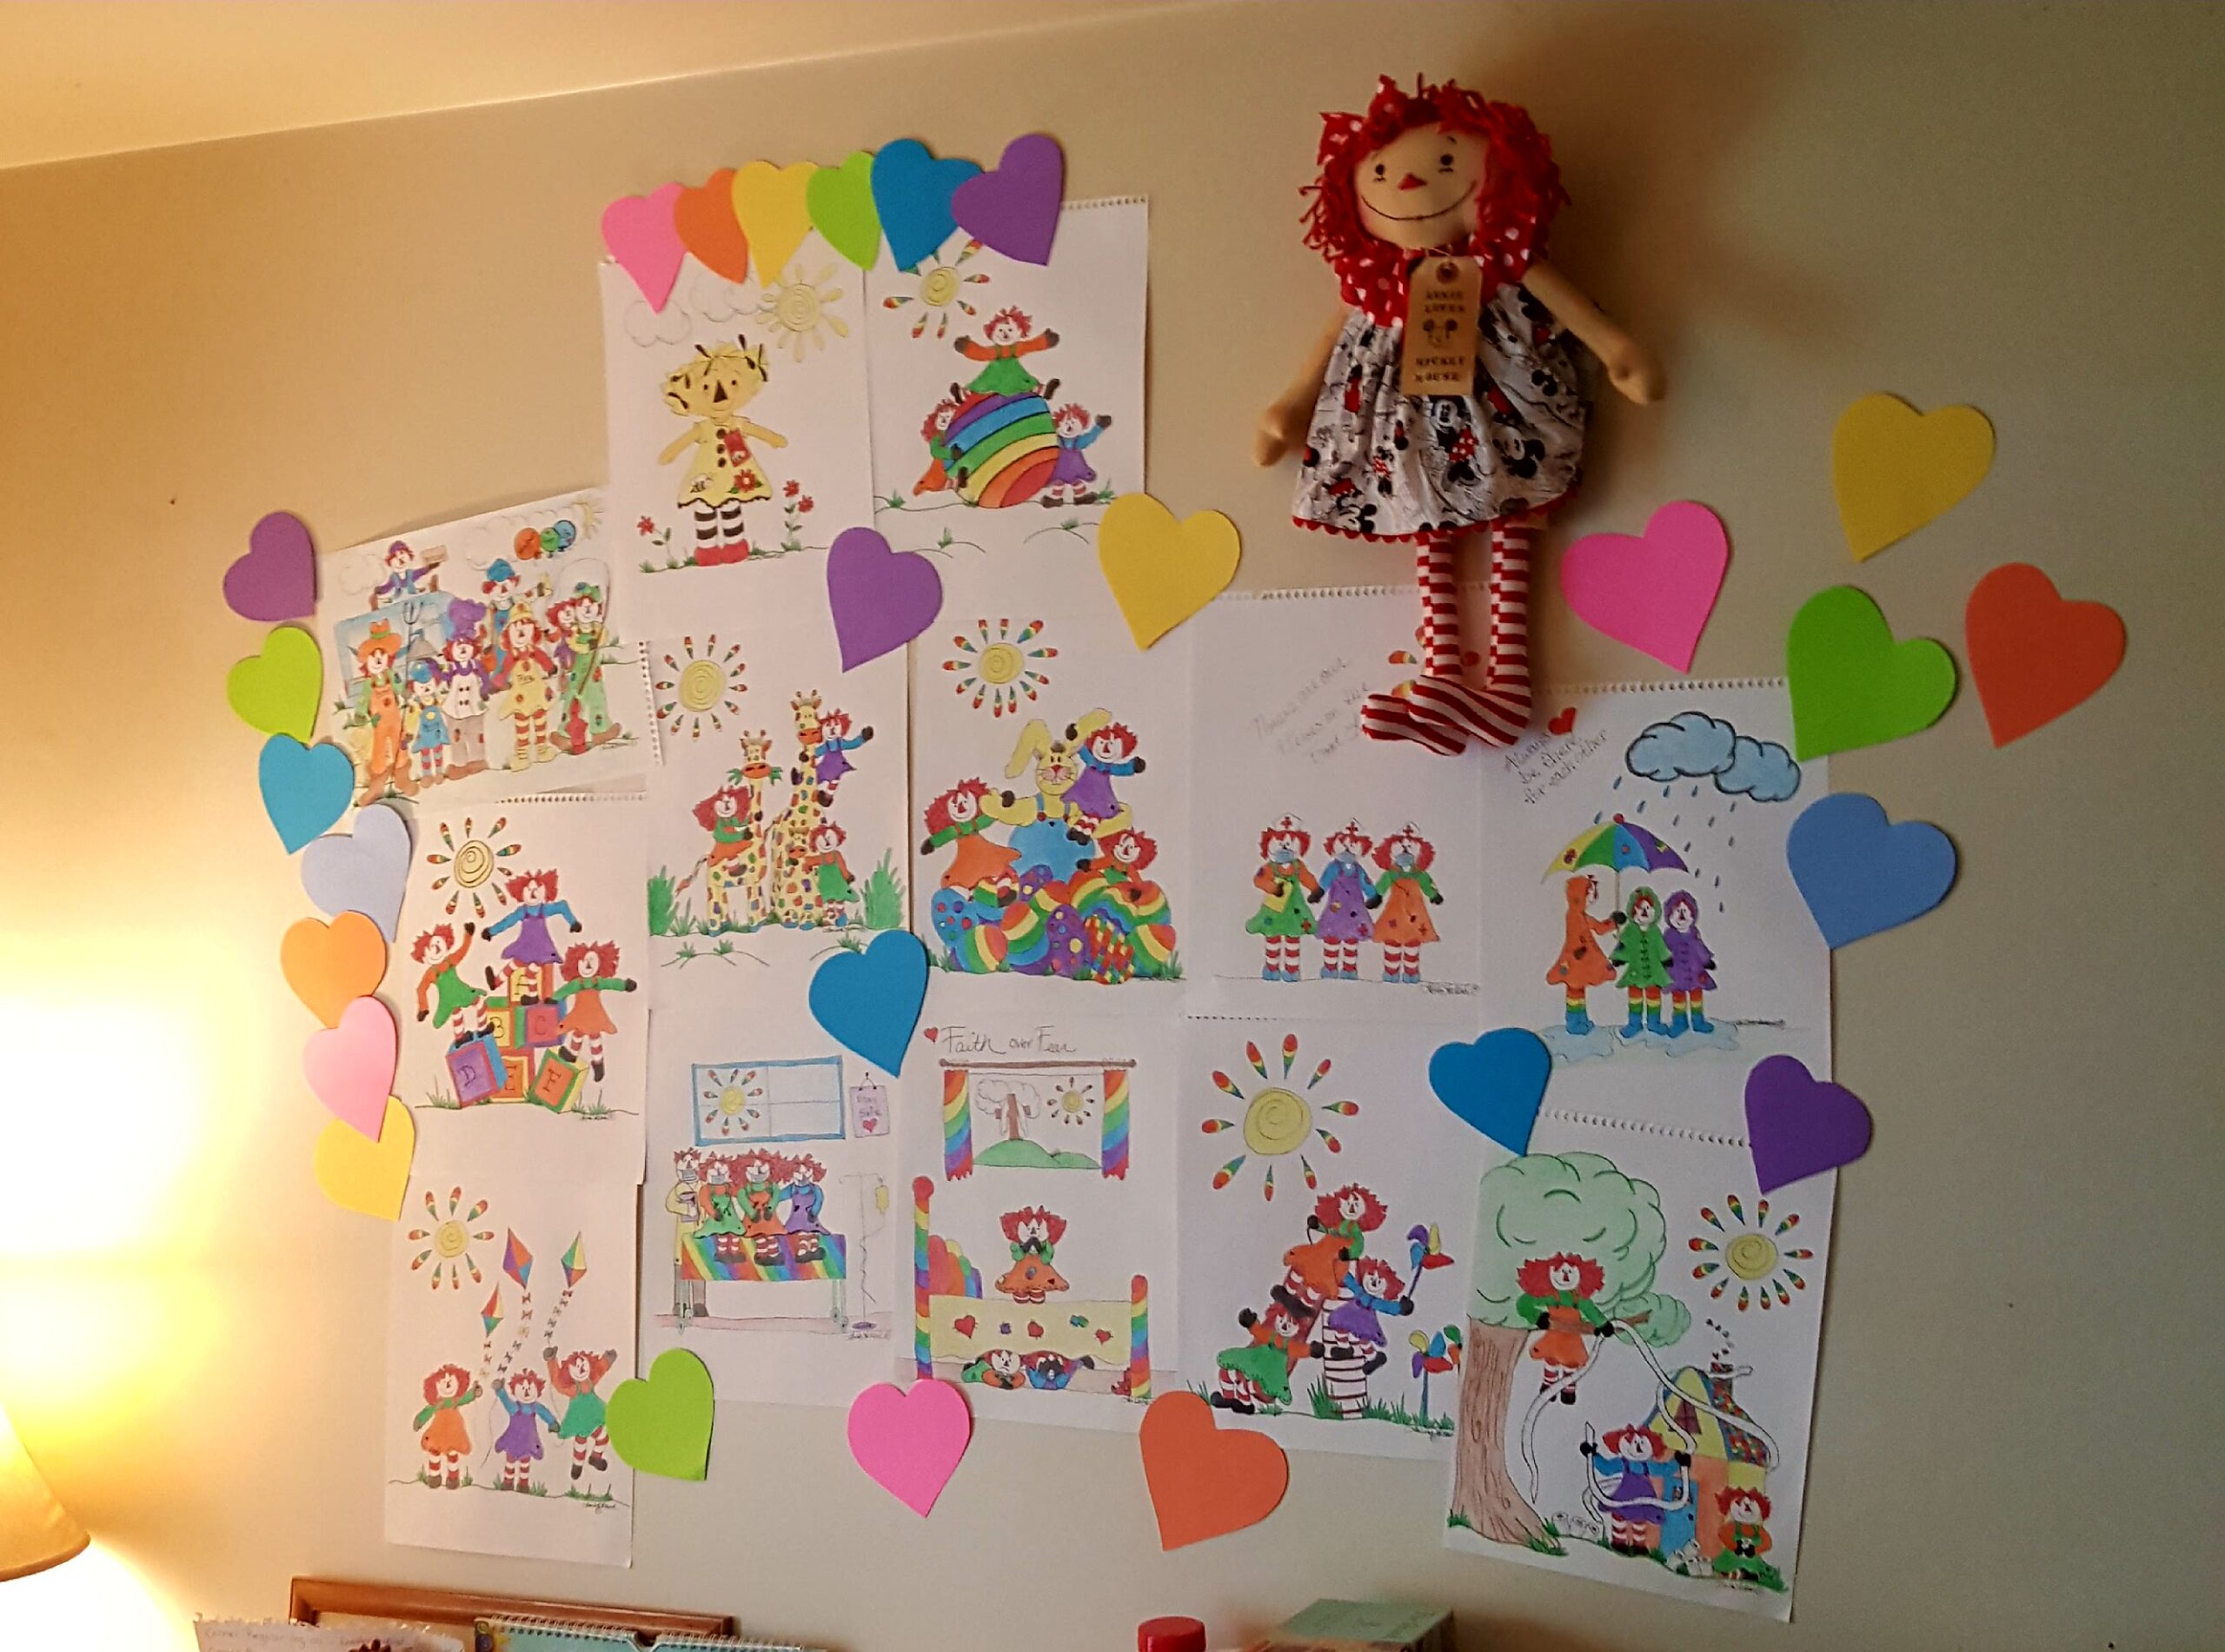 A photograph of a wall with many colorful and handdrawn drawings with hearts surrounding them.